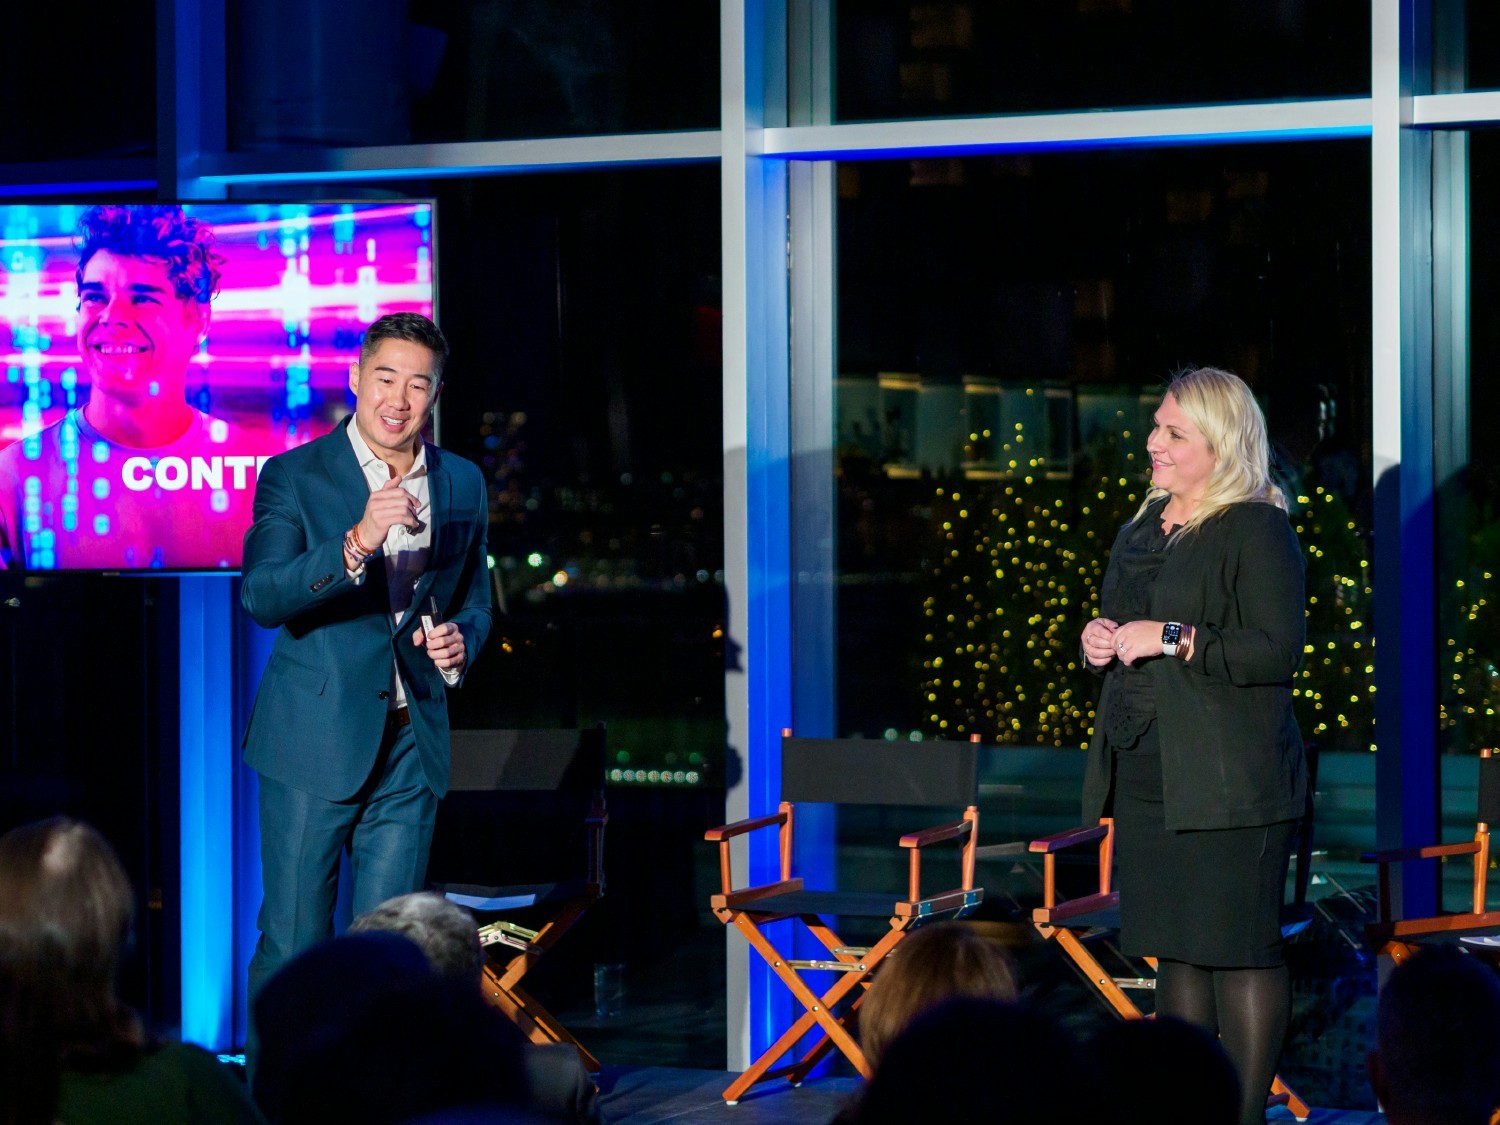 Brand Success launch event in NYC (including Oscar Yuan and Lindsay Franke presenting) 